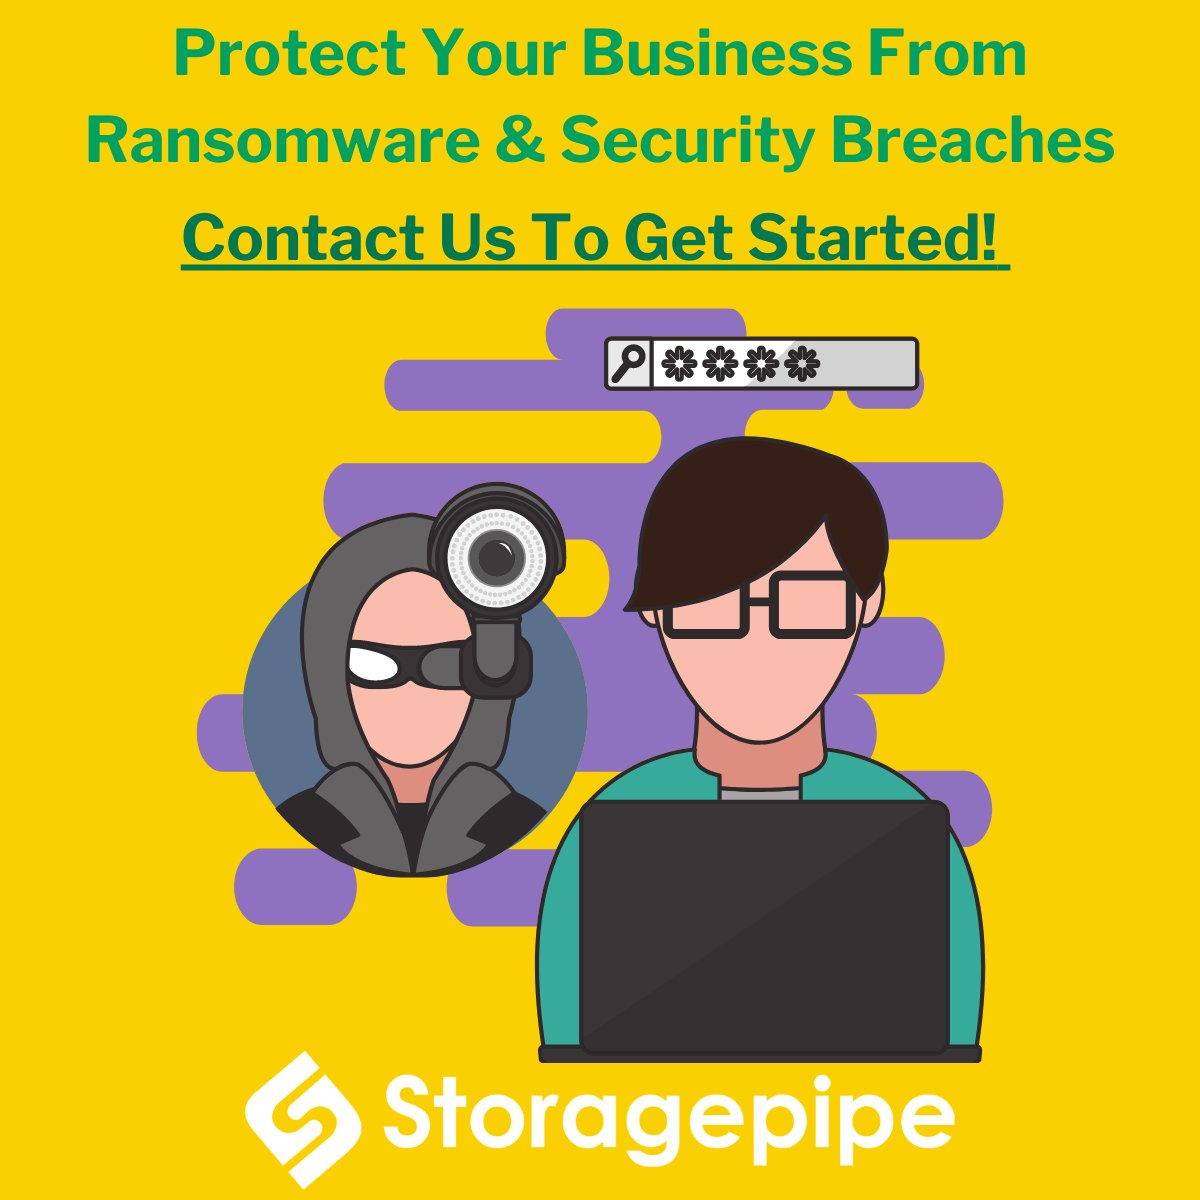 We excel at matching our customers’ business needs to the right disaster recovery services to meet their objectives, budget, and business model.

Contact us: storagepipe.com/contact/ 

#ransomware #ransomwarerecovery #ransomwarerecoveryplan #ransomwarestats ransomwarestatistics